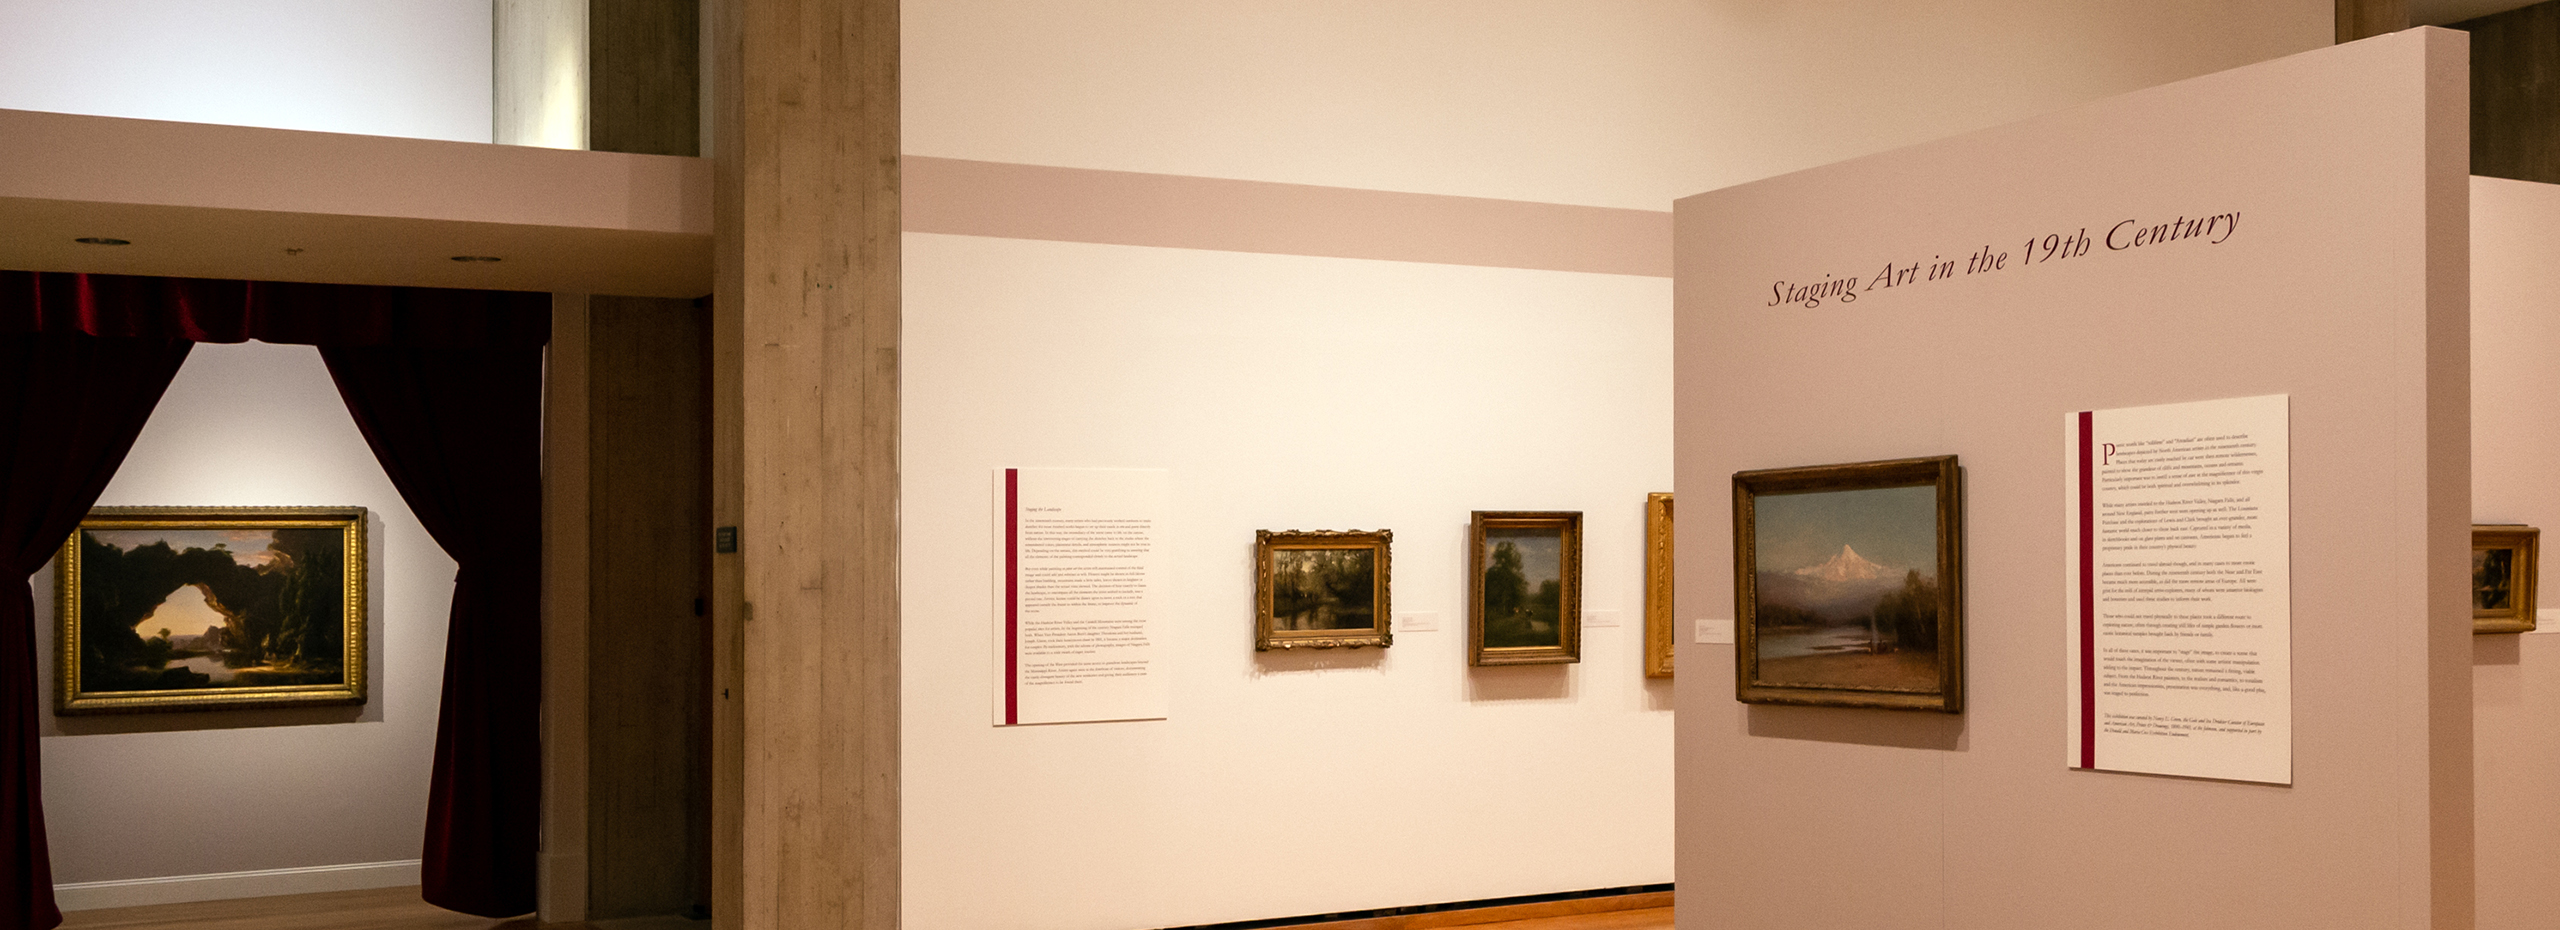 A museum exhibition gallery with several oil paintings and an alcove framed by dark red curtains